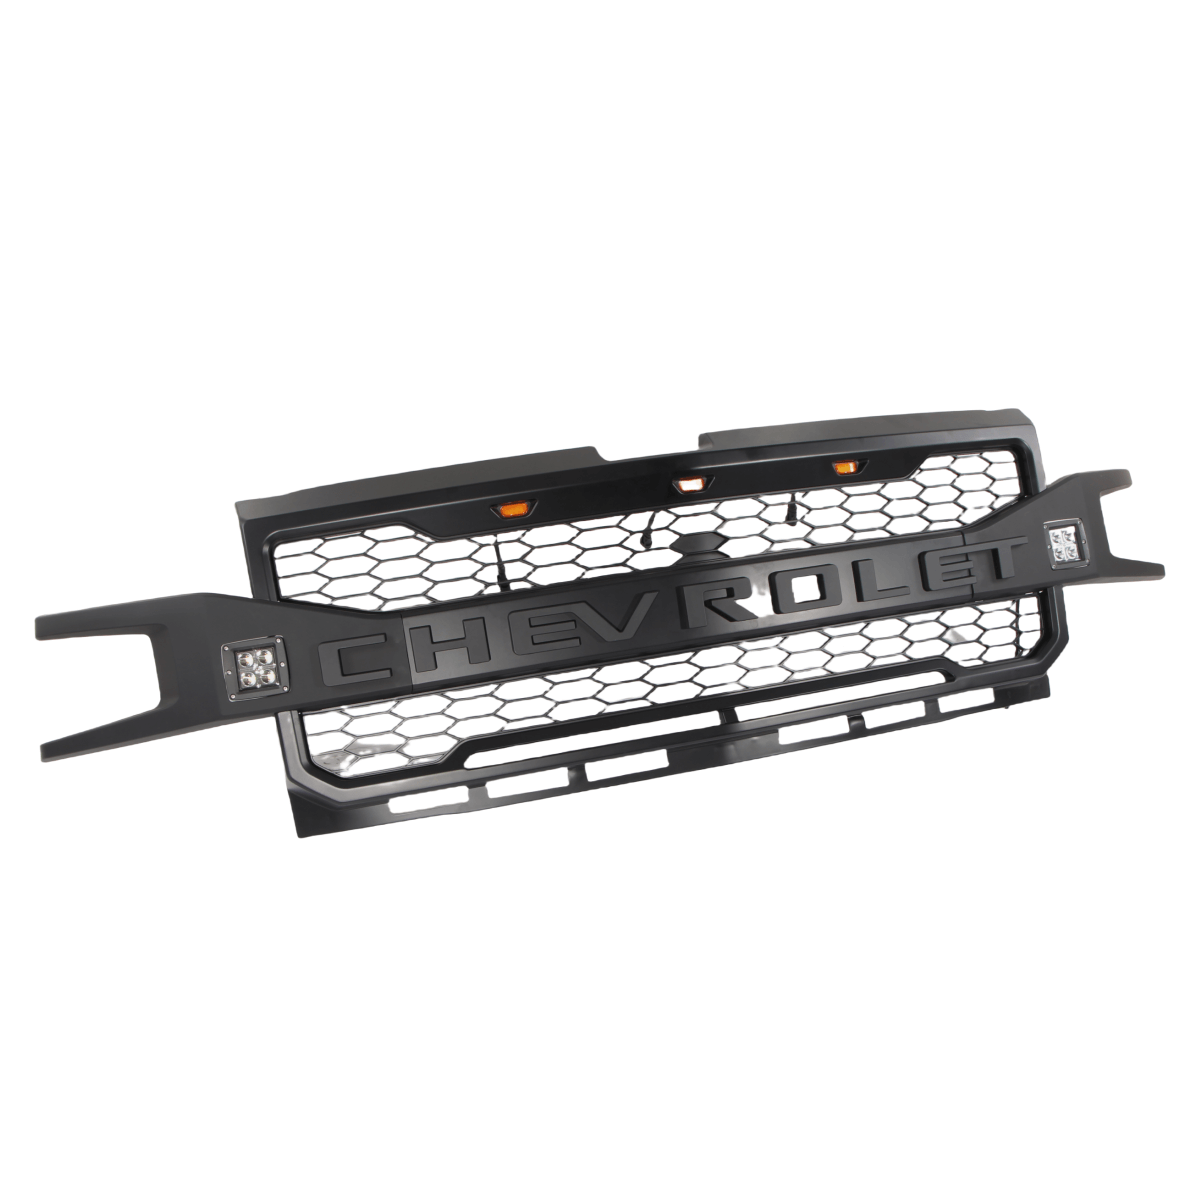 {WildWell}{ Chevrolet Grille}-{ Chevrolet Silverado Grille 2019-2020/3}-left